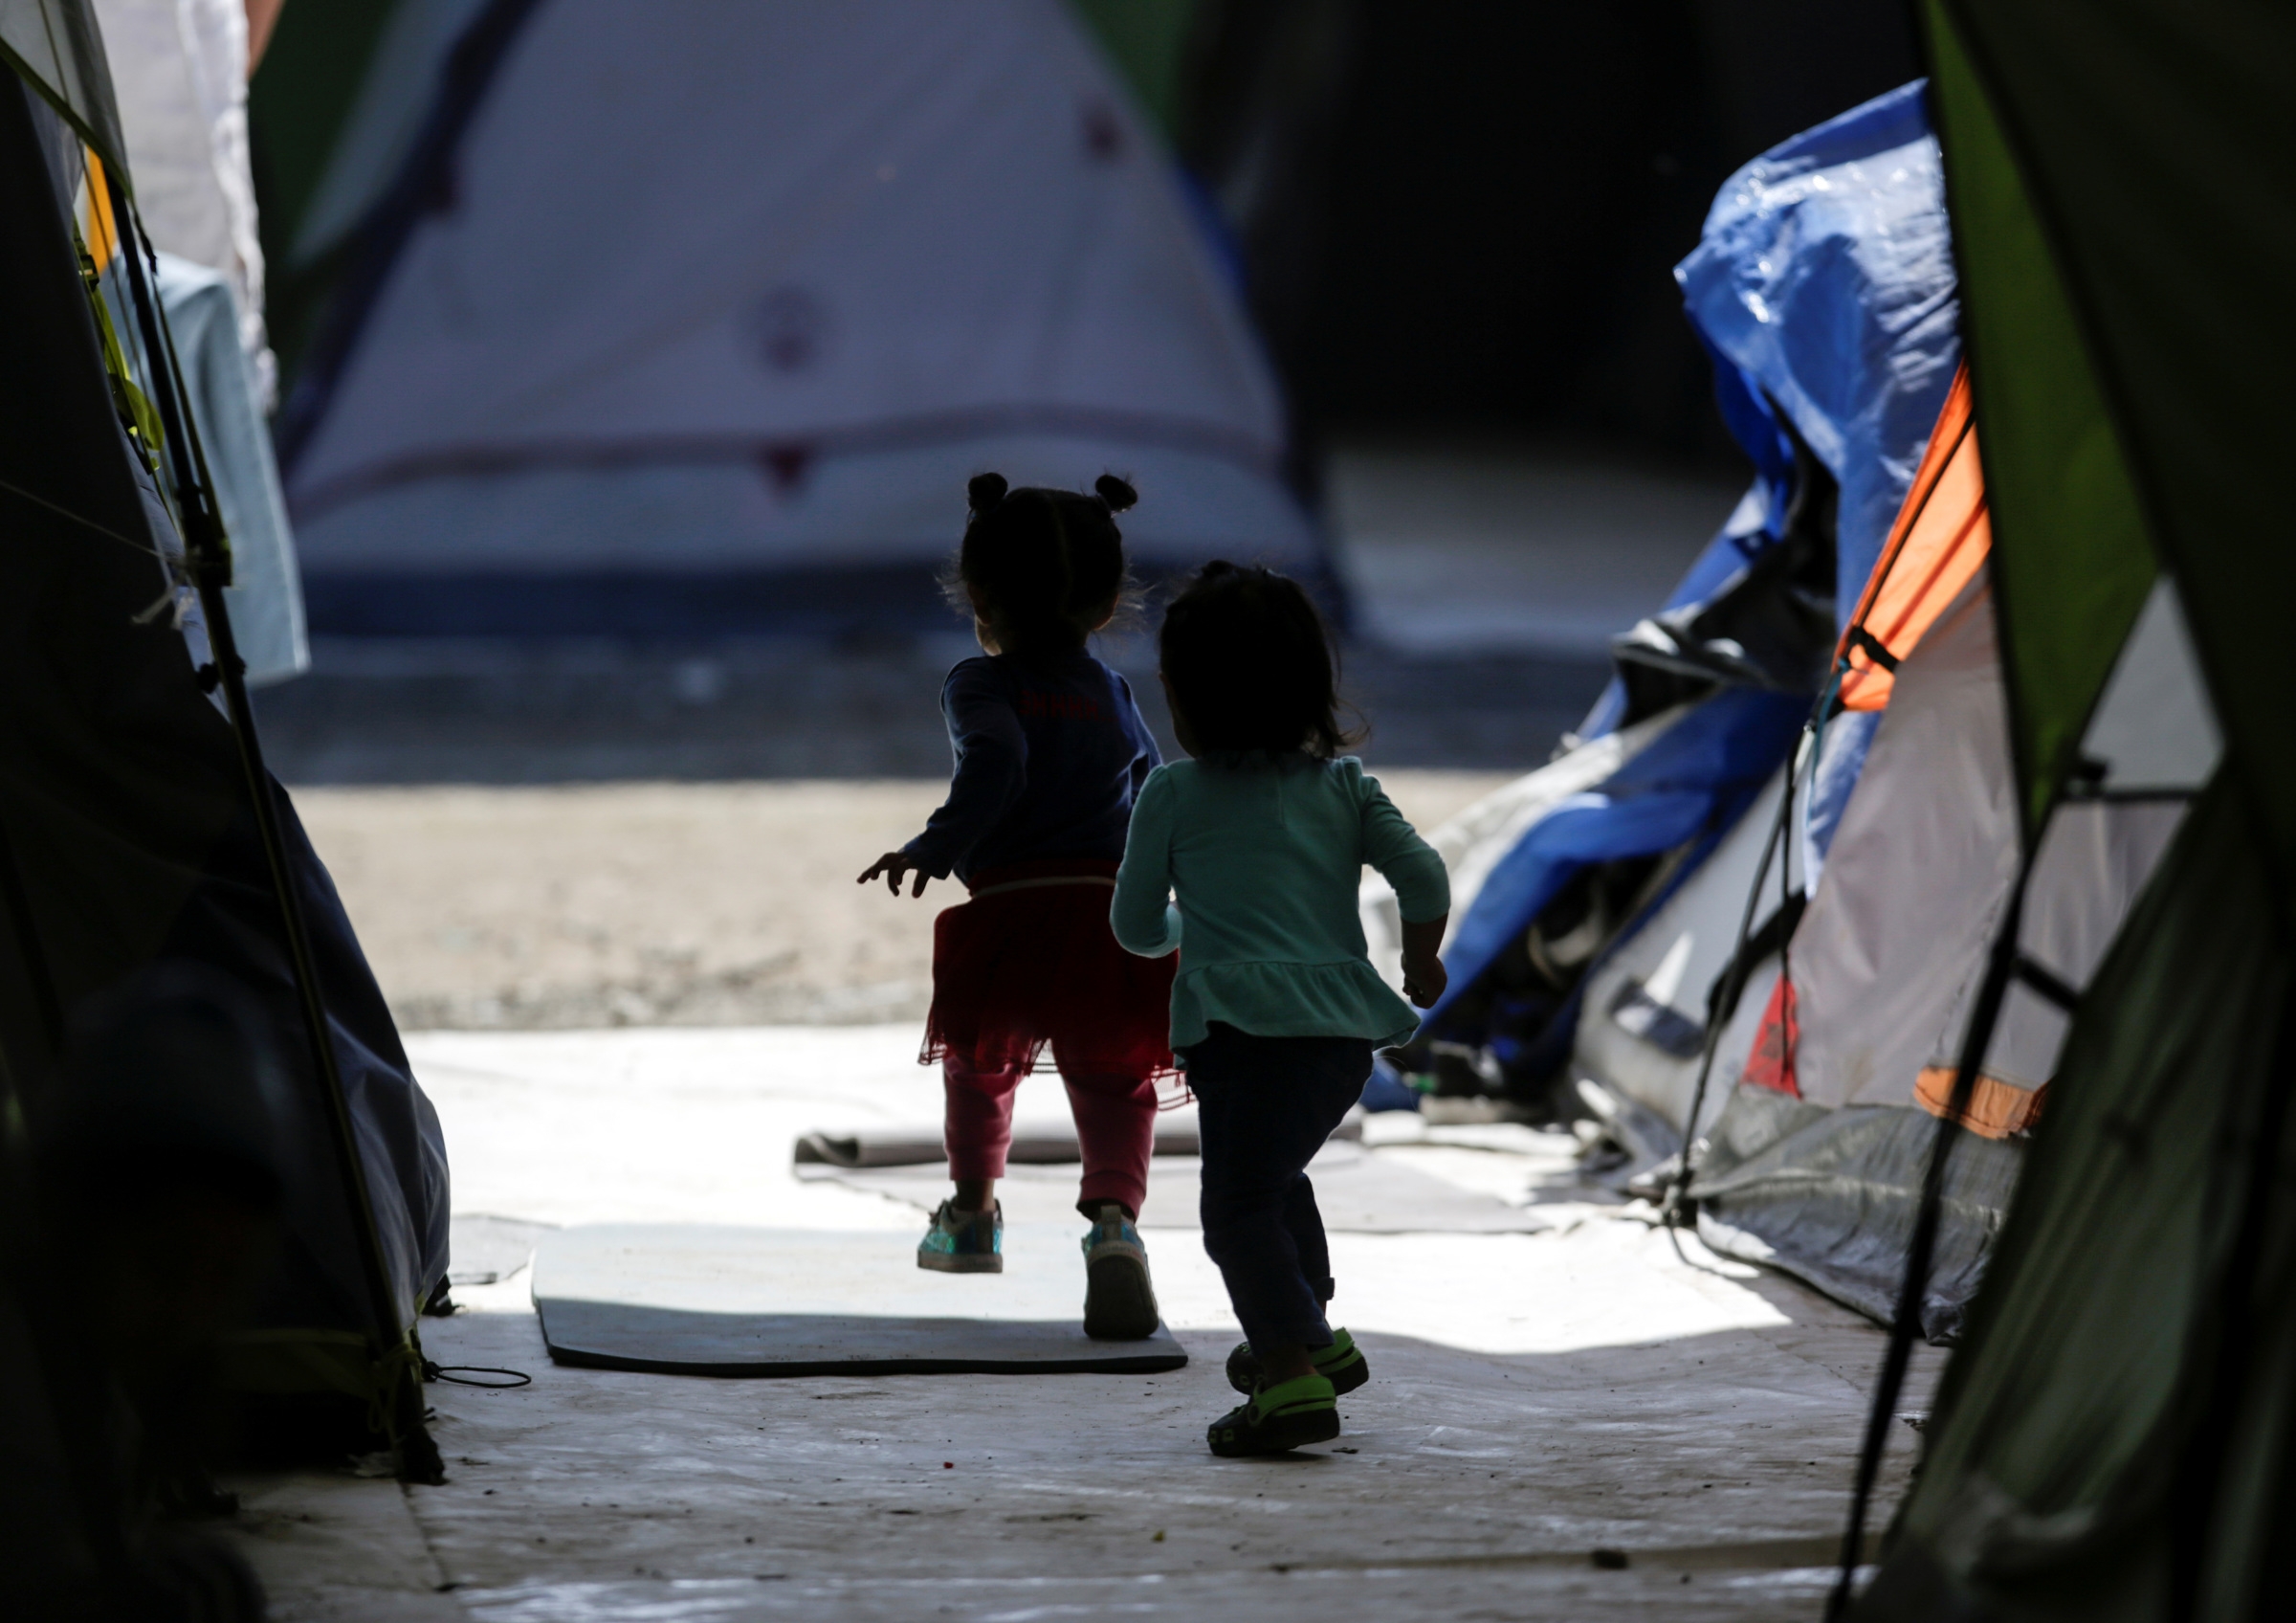 Migrant girls, who are asylum-seekers sent back to Mexico from the U.S. under the Trump administration's "Remain in Mexico" policy, are seen playing at a provisional campsite near the Rio Bravo in Matamoros, Mexico, Feb. 27, 2020. The policy is officially